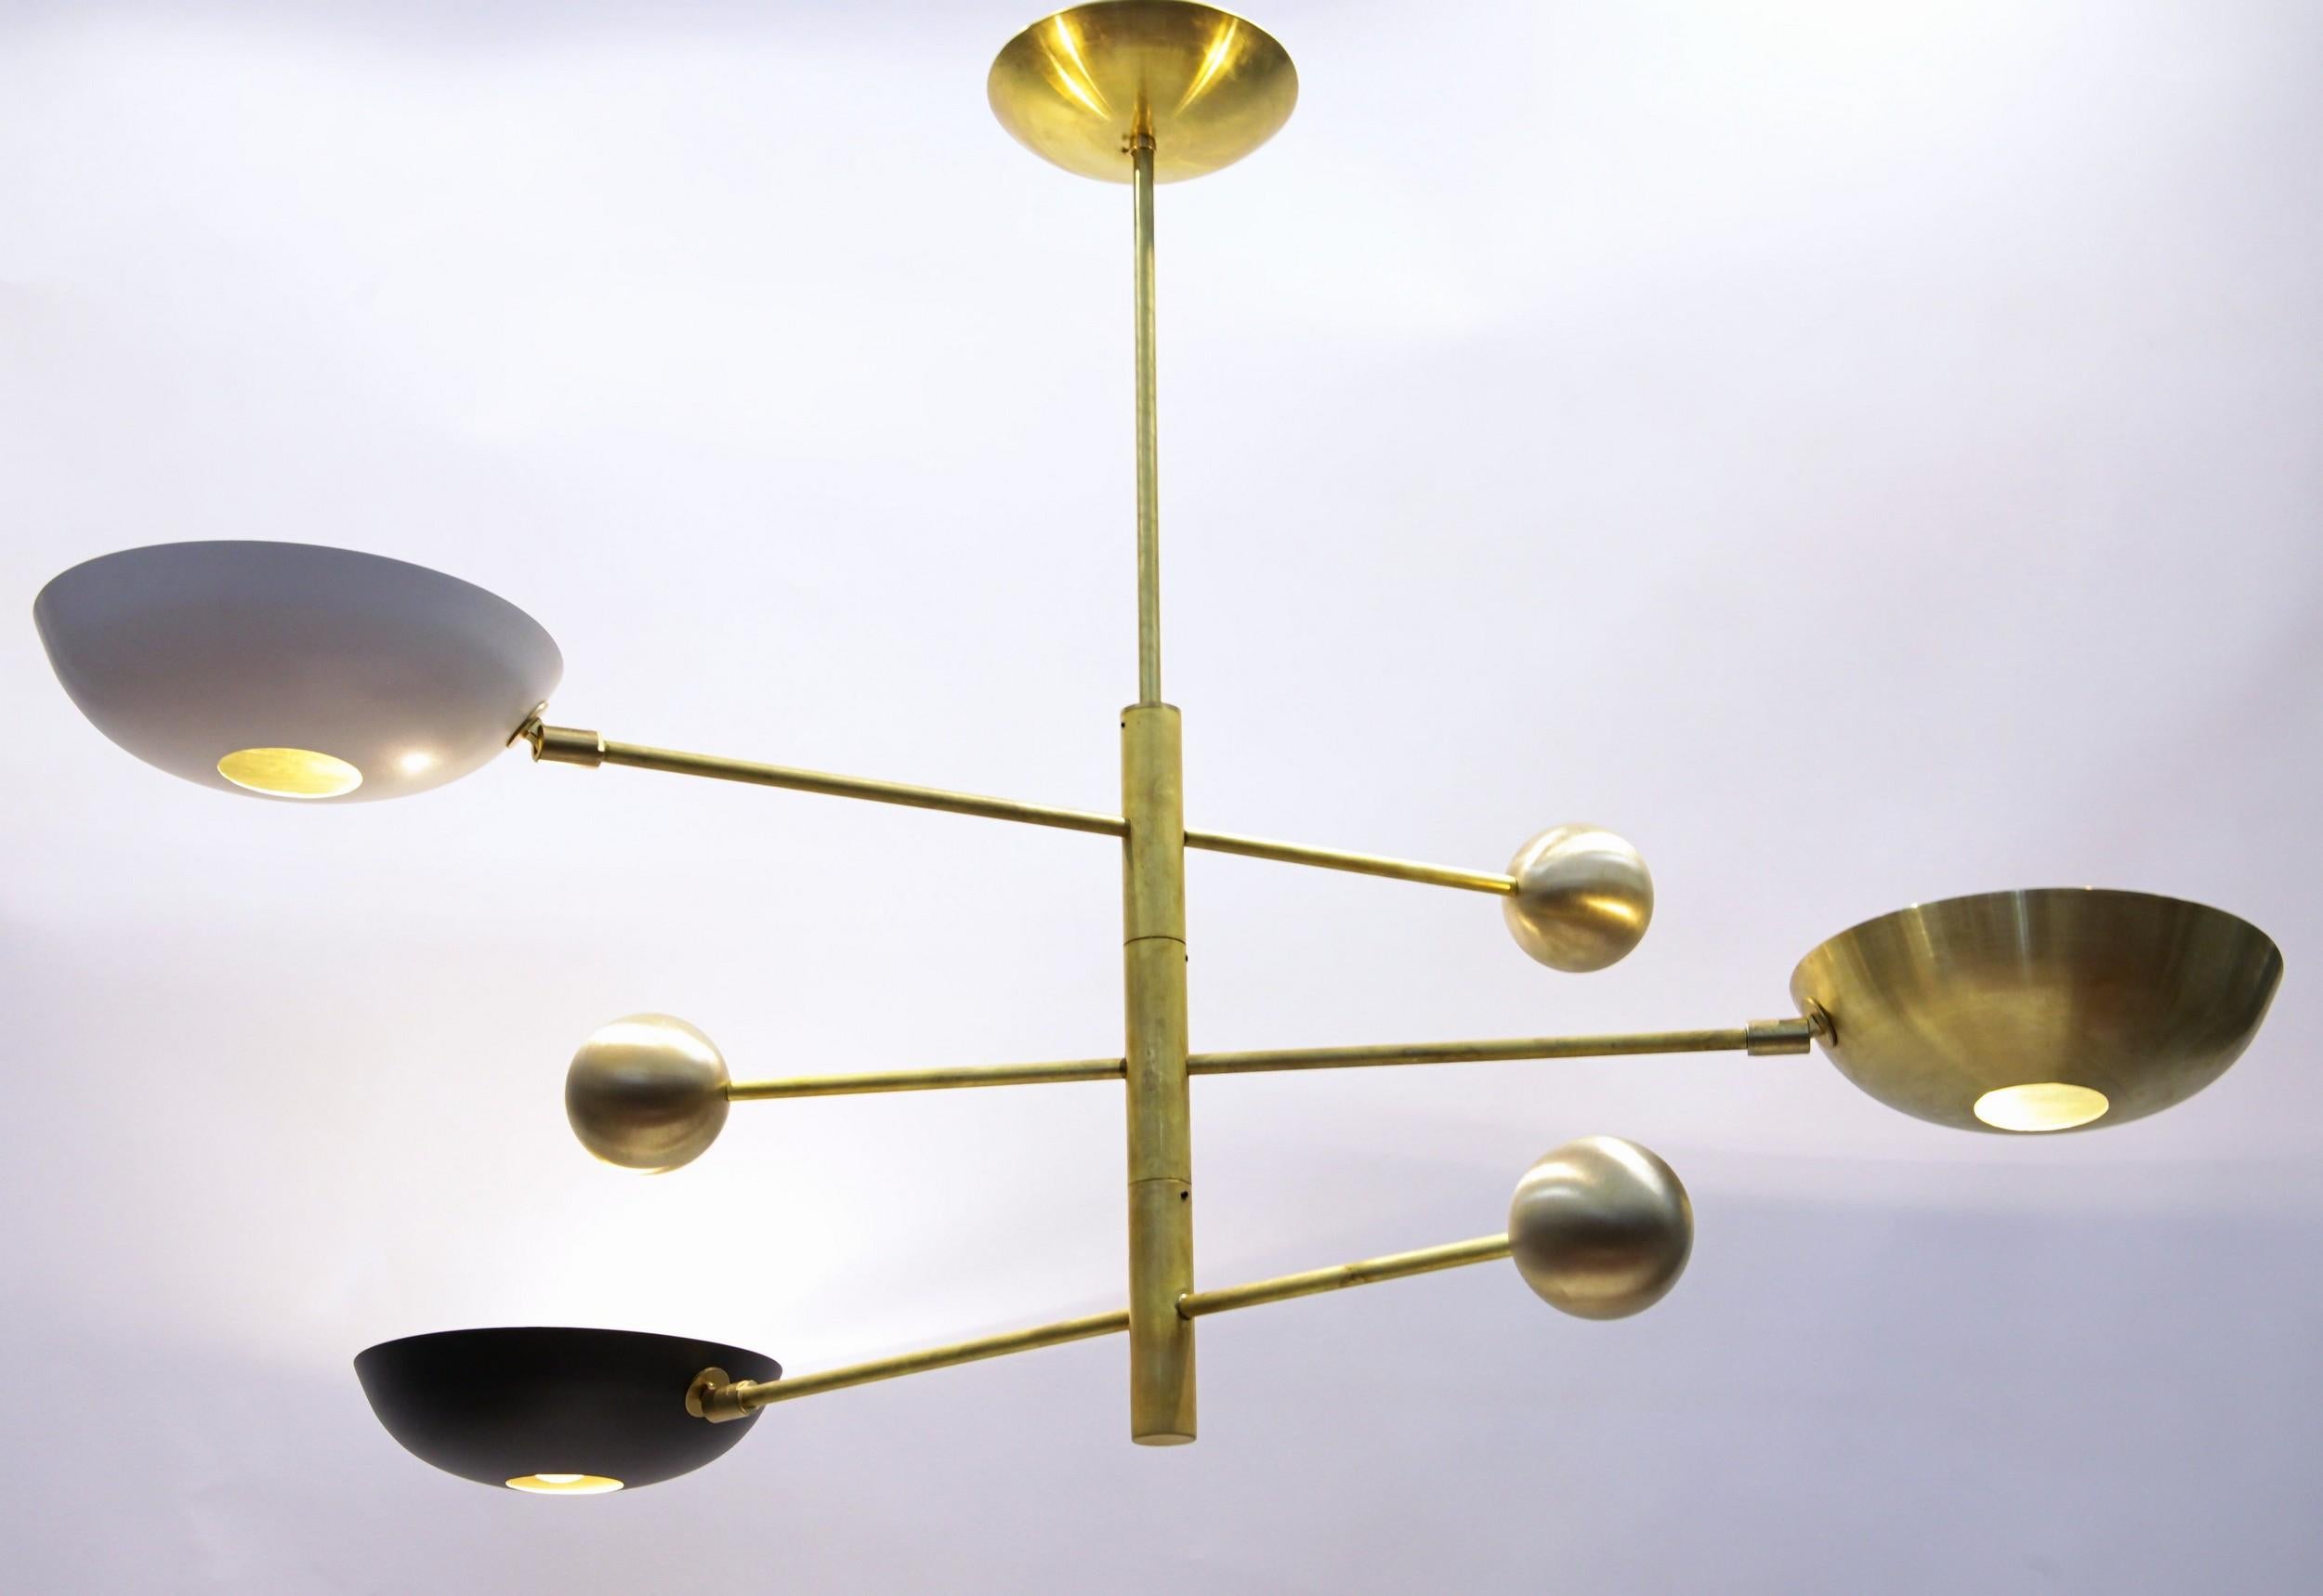 Orbitale Brass Chandelier 3 Rotating Balanced Arms, 120 cm 48 inches diameter For Sale 8